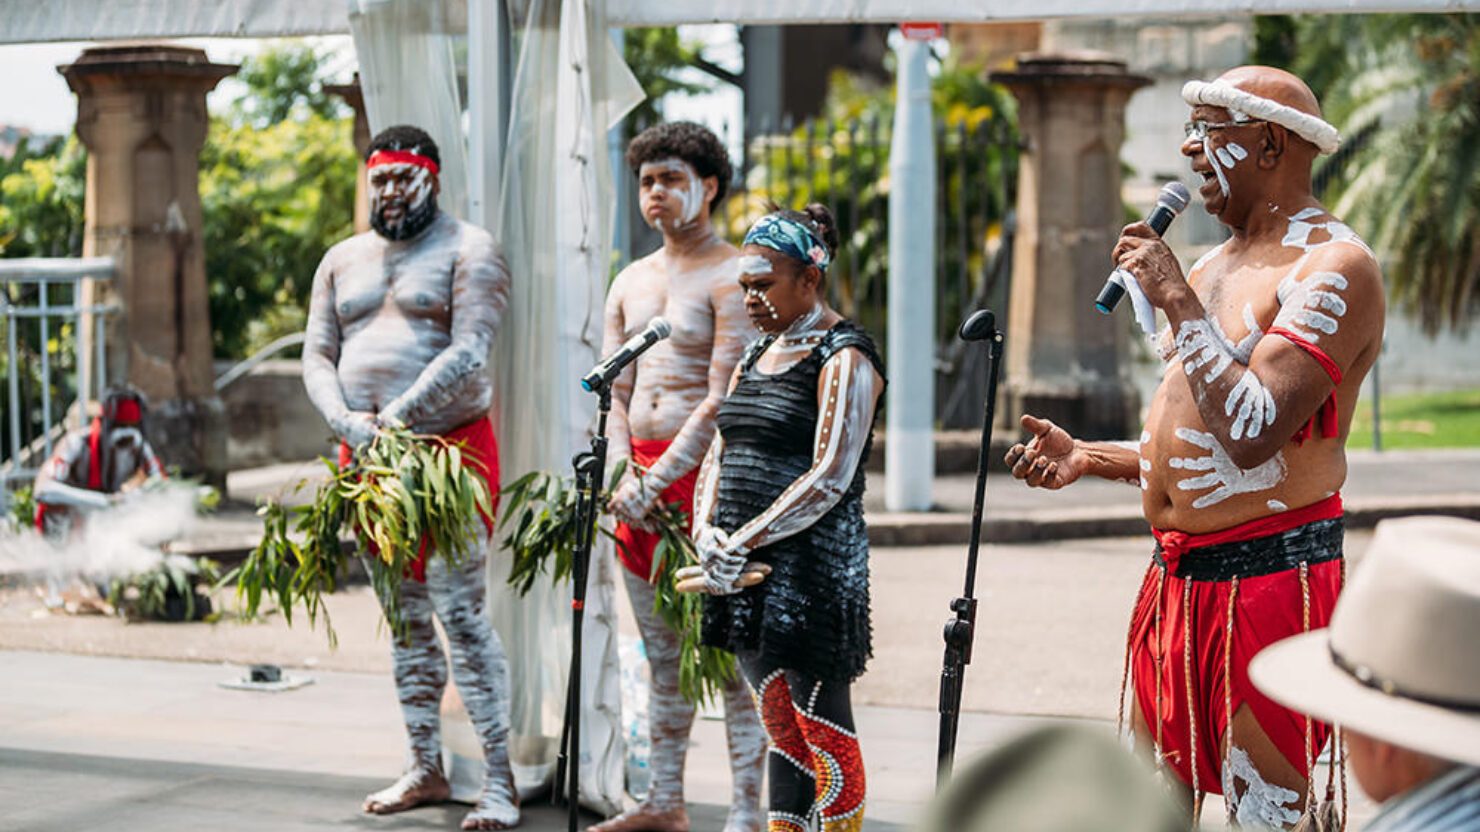 AARNet Global CEO Forum, Aboriginal Cultural Performance and Smoking Ceremony